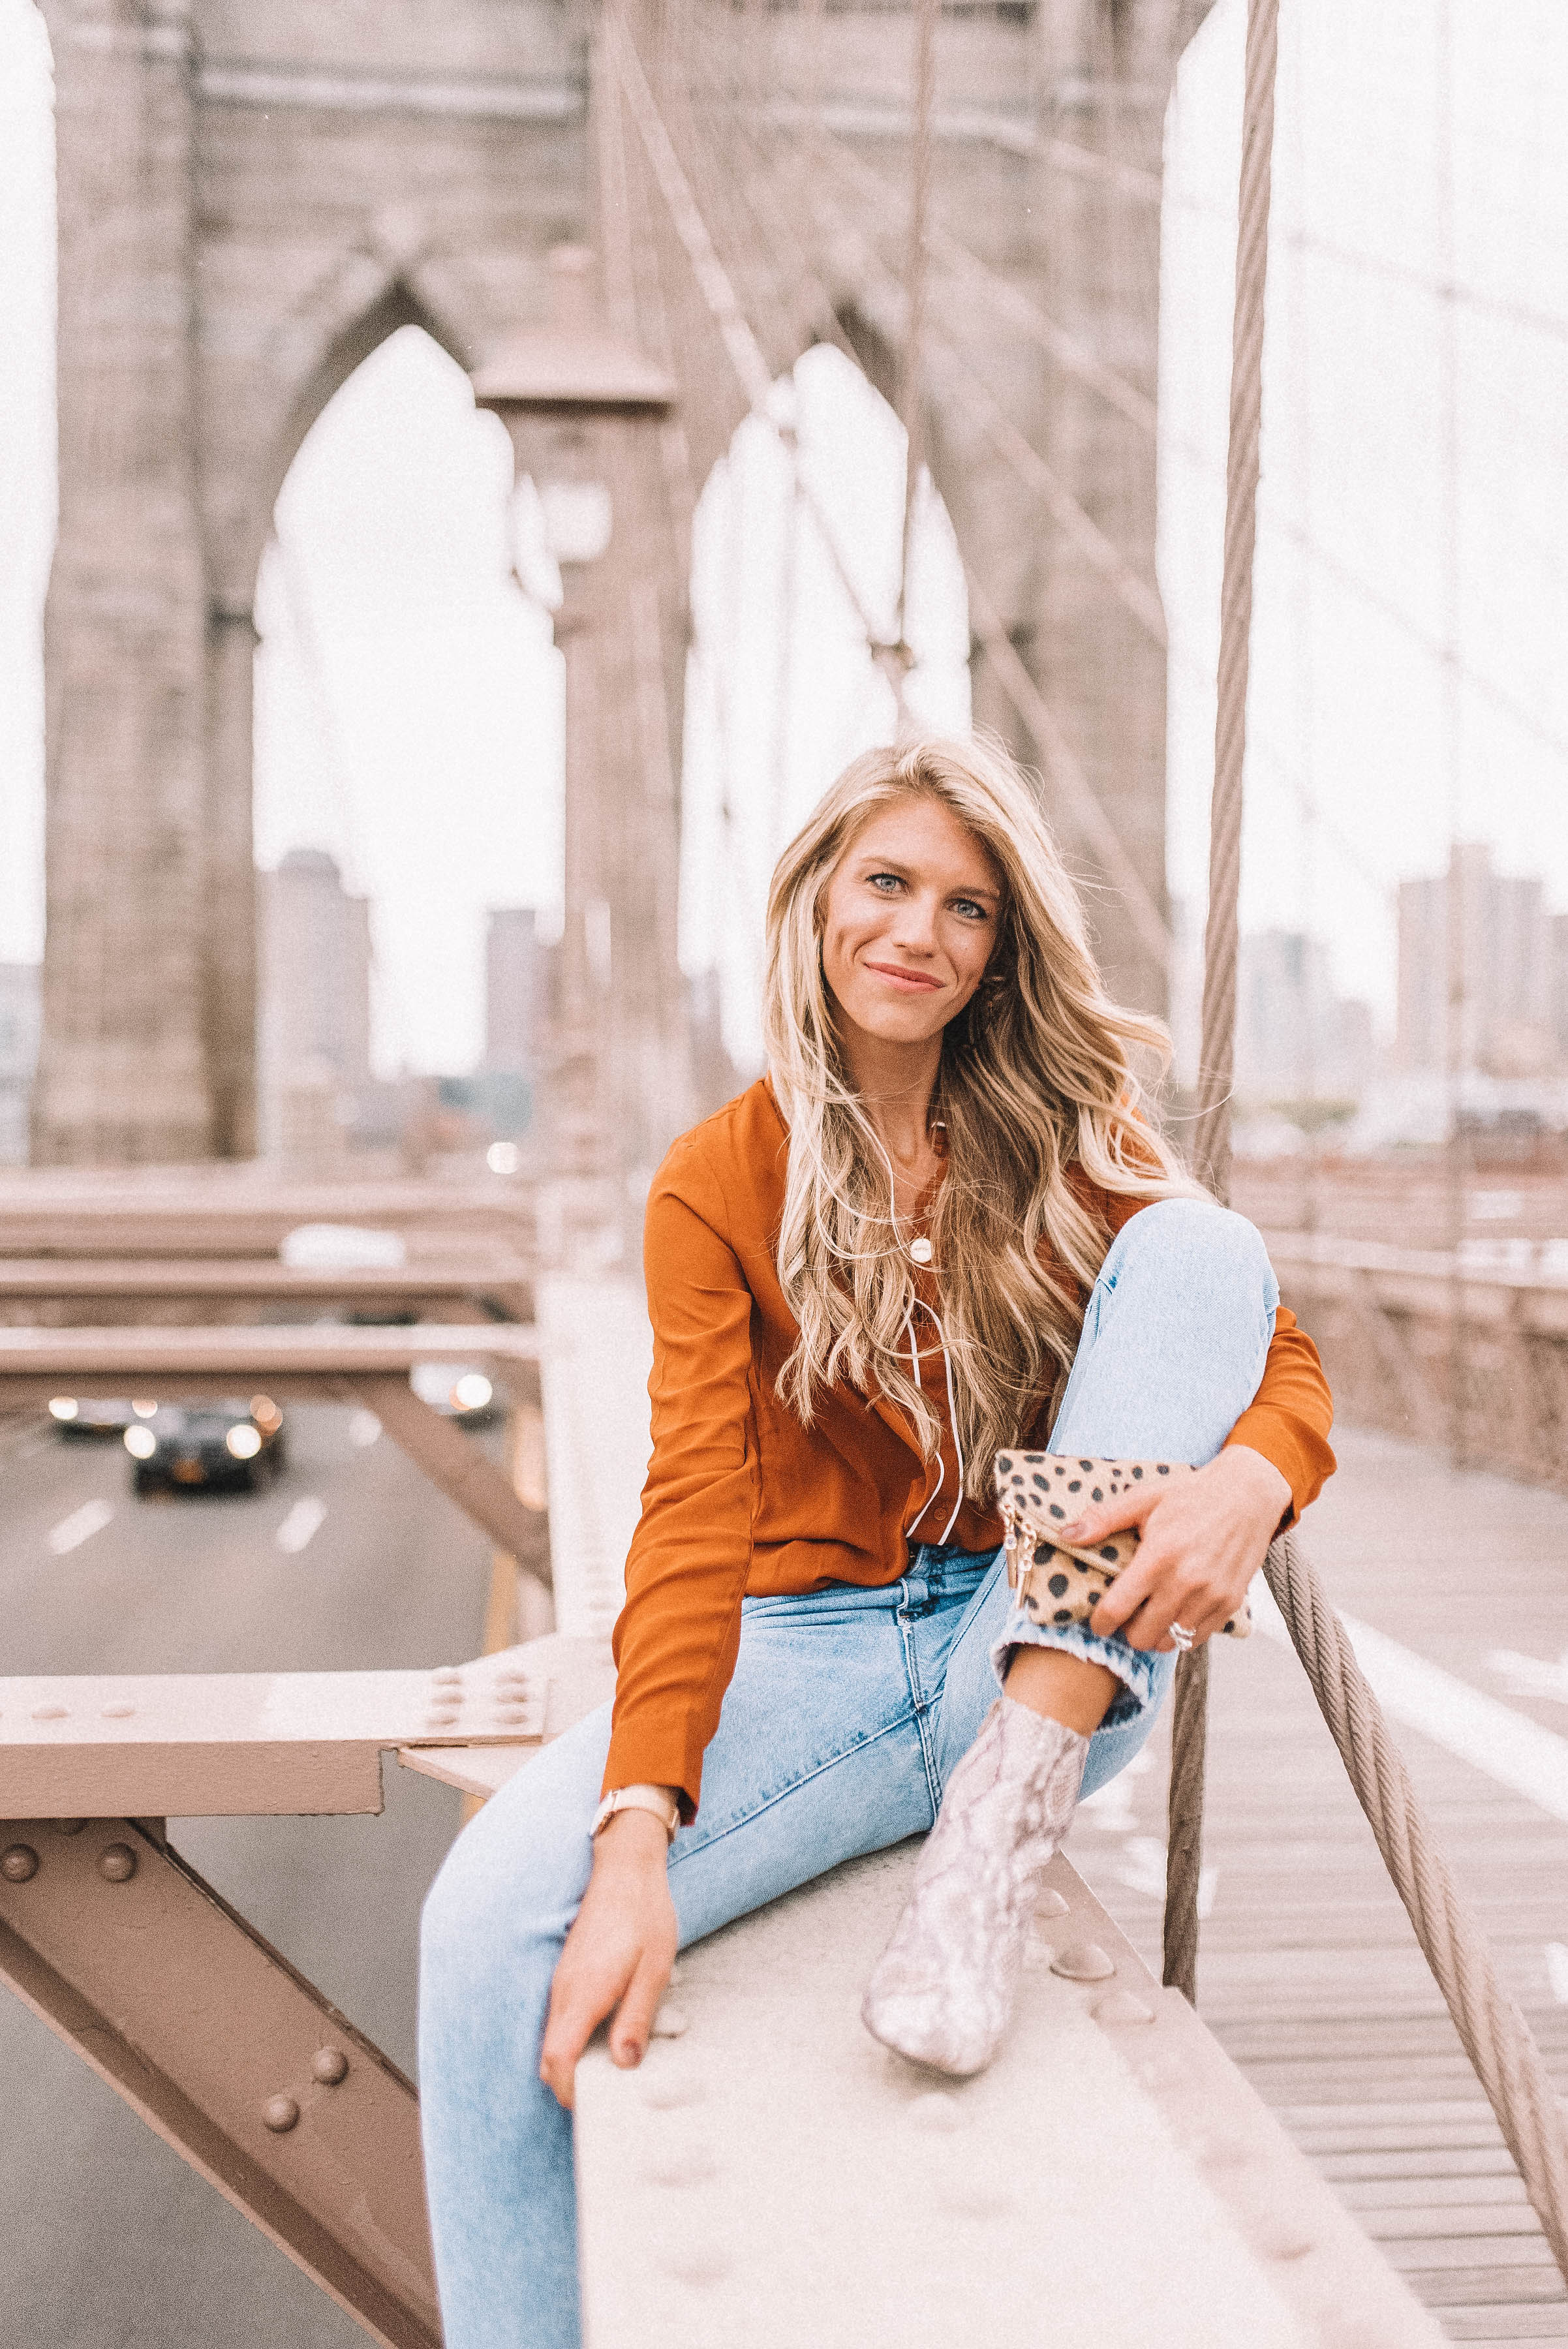 Brooklyn Bridge My First NYFW as a lifestyle and fashion blogger Ashley Bell Tallblondebell